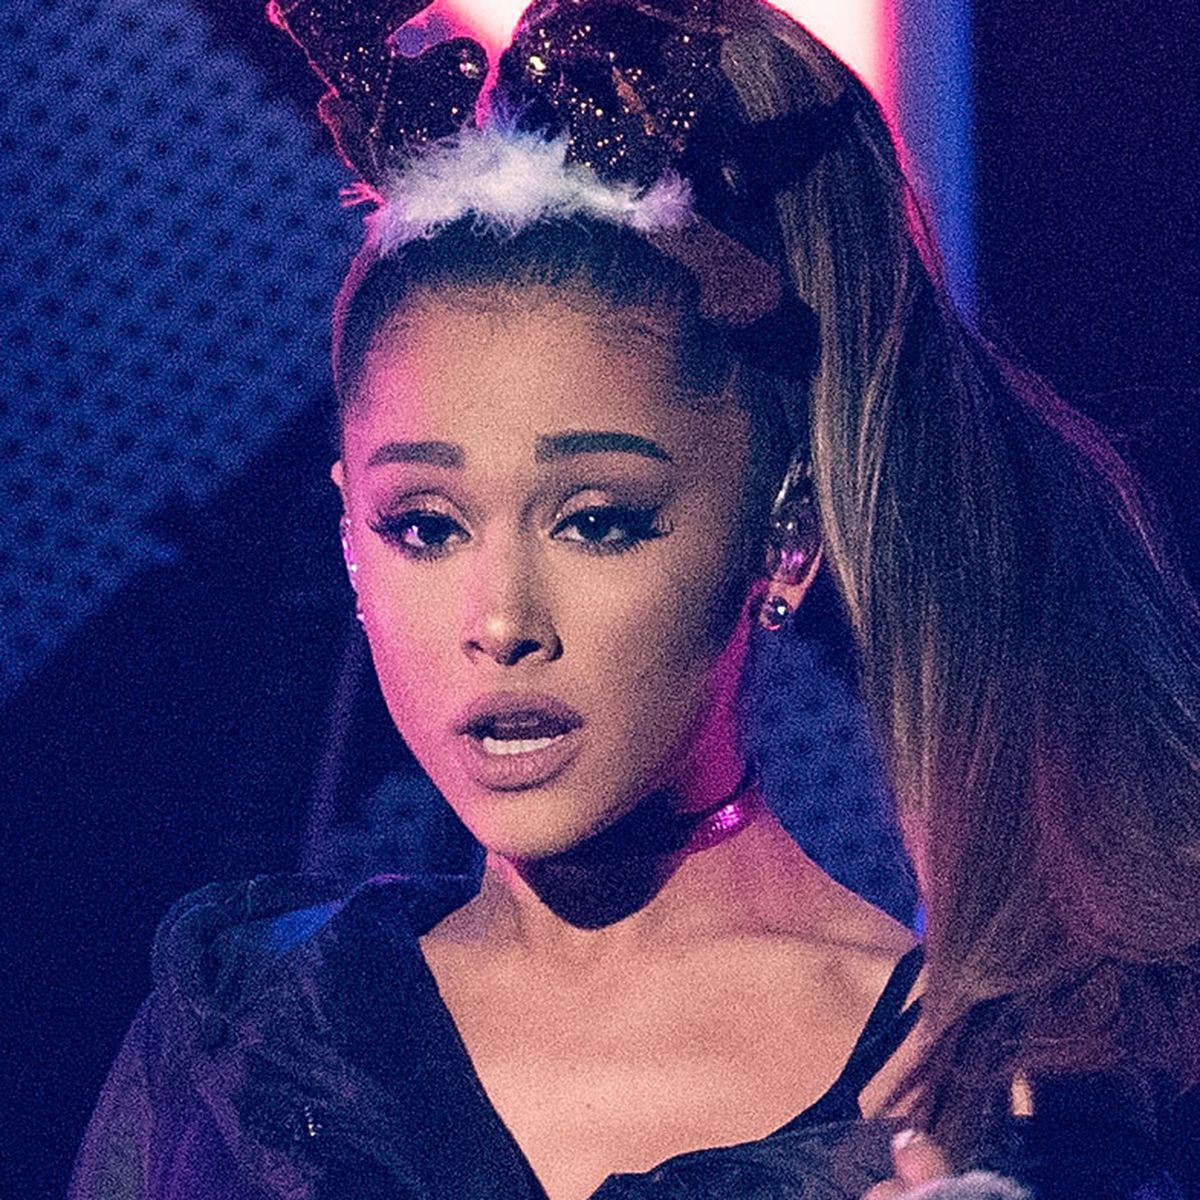 Ariana Grande Nude Xxx - Ariana Grande scolds and schools male fan after XXX comment: 'I am not a  piece of meat' - 9Celebrity